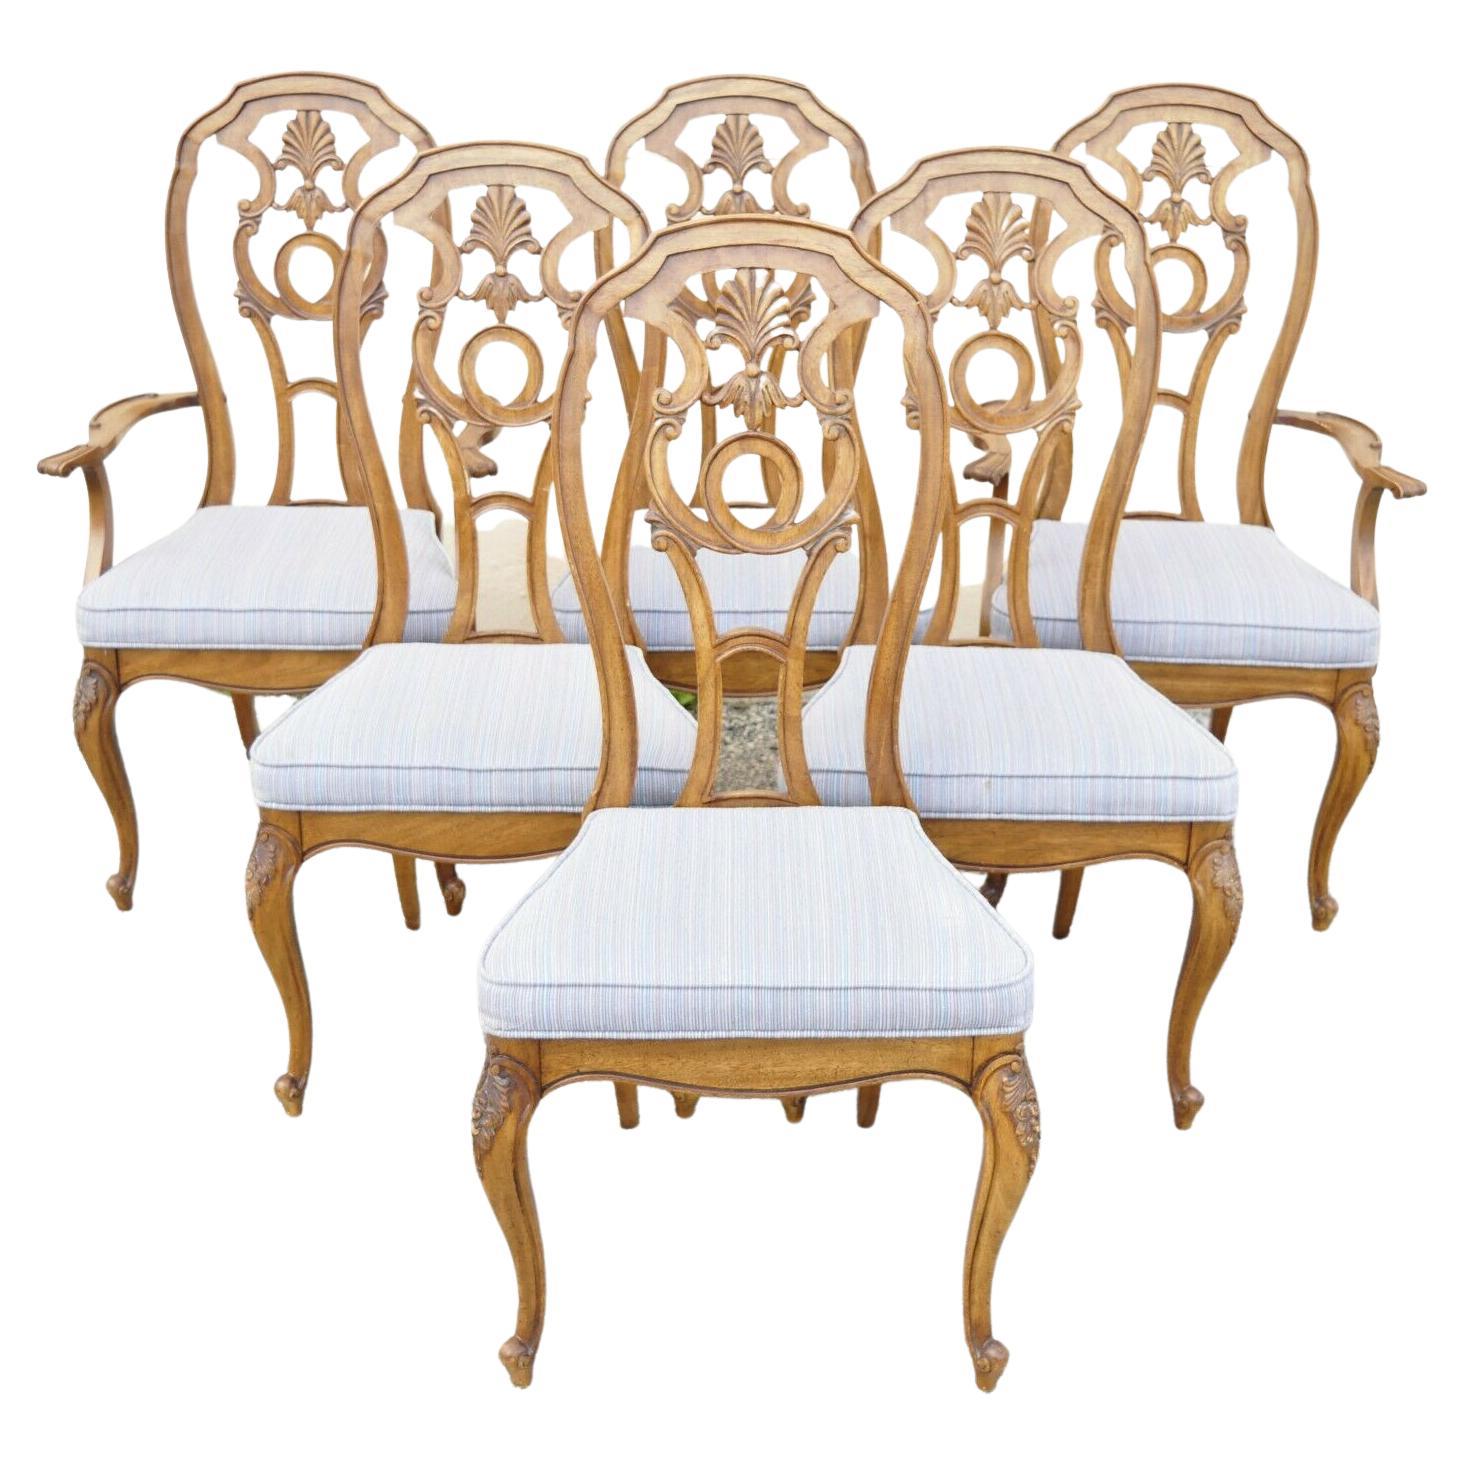 Vintage Italian Baroque Style Carved Wood Dining Chairs, Set of 6 For Sale